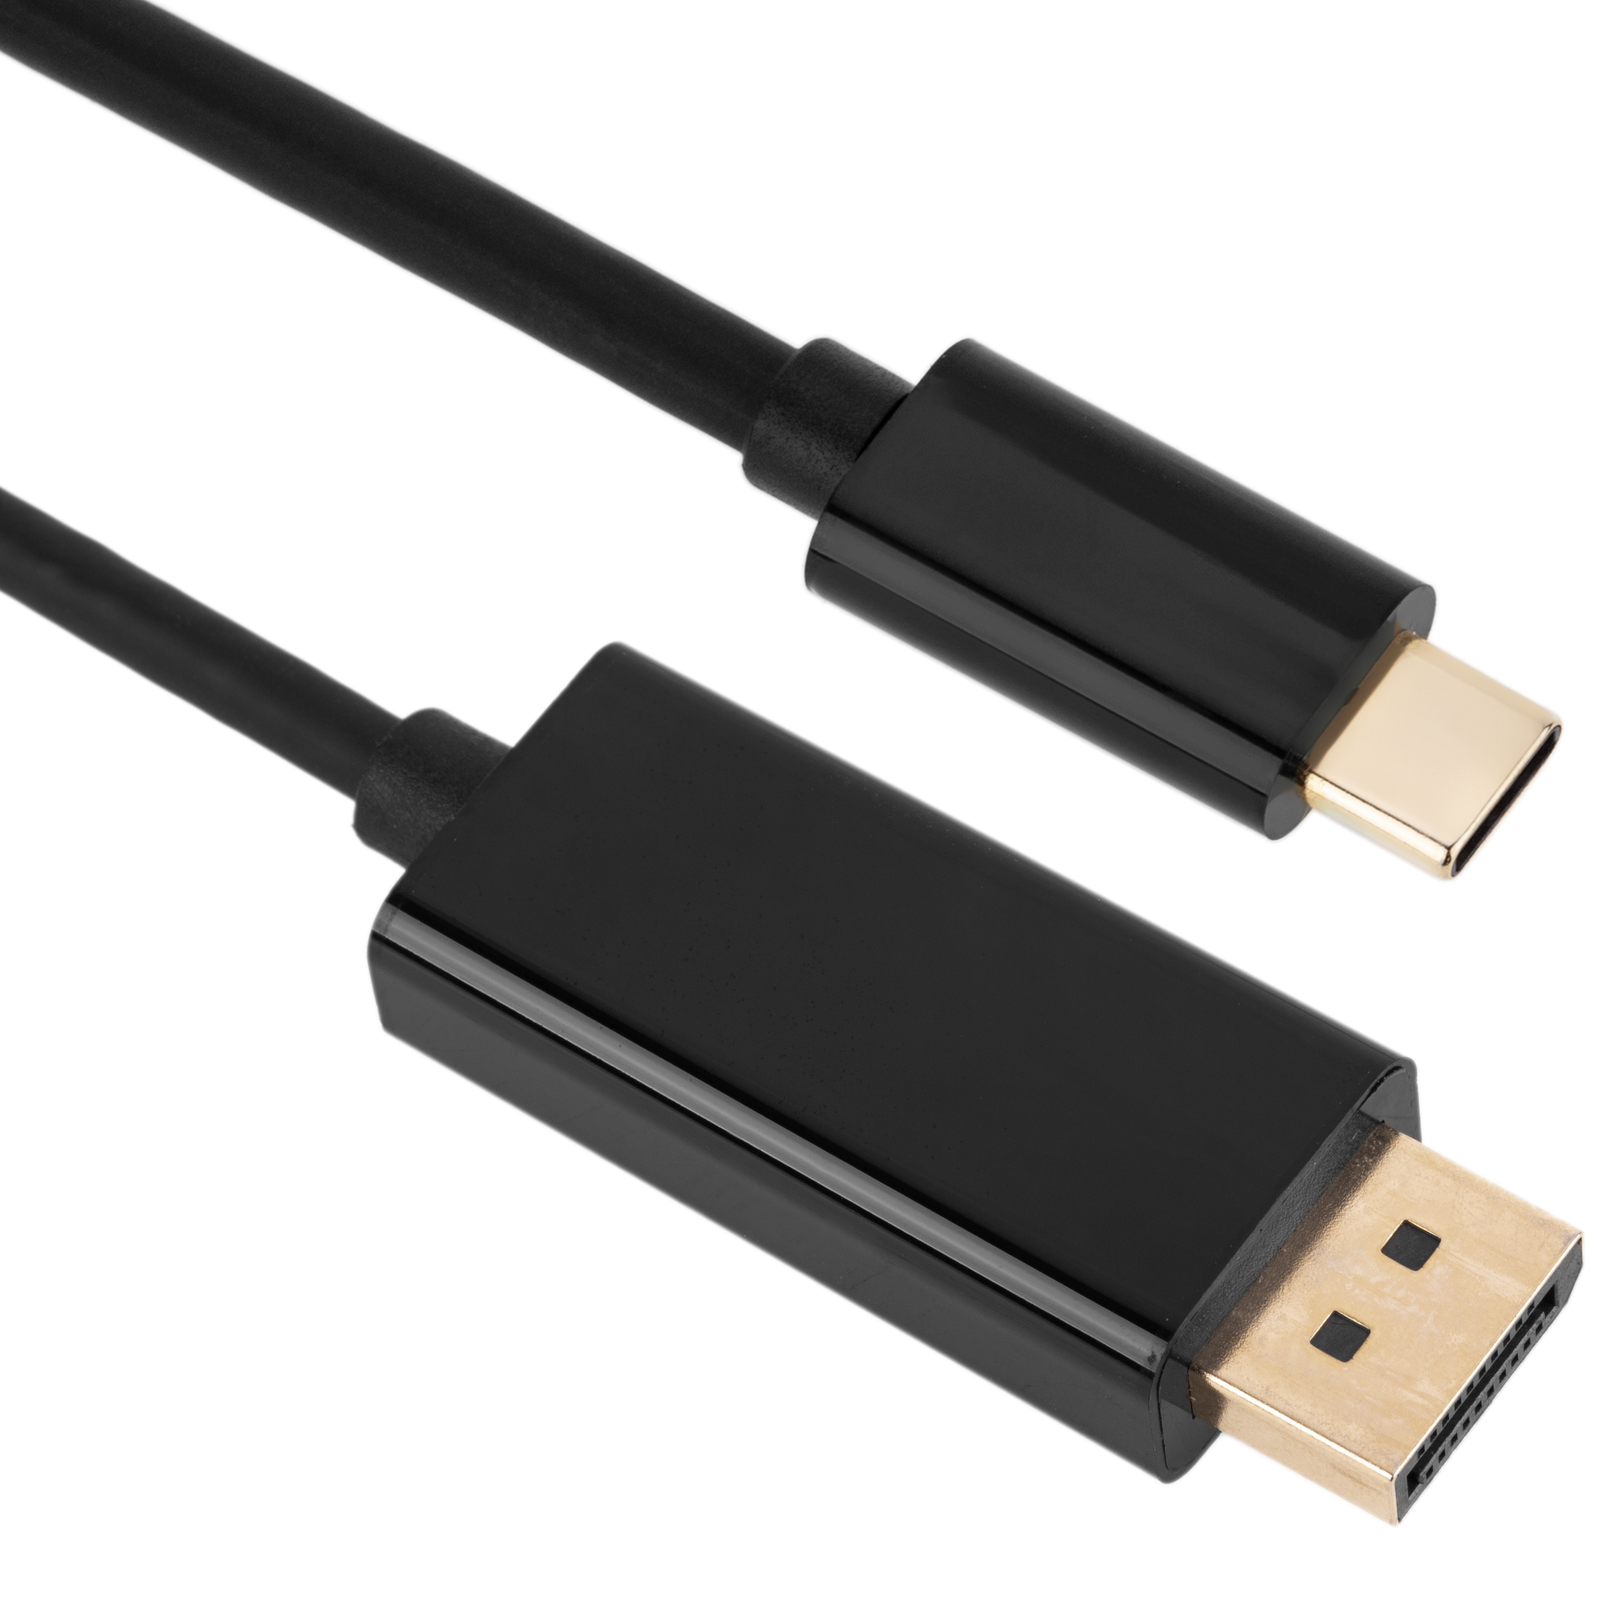 Cable USB 3.1 C male to DisplayPort A male, 4K Ultra HD 60Hz video  converter 5m - Cablematic